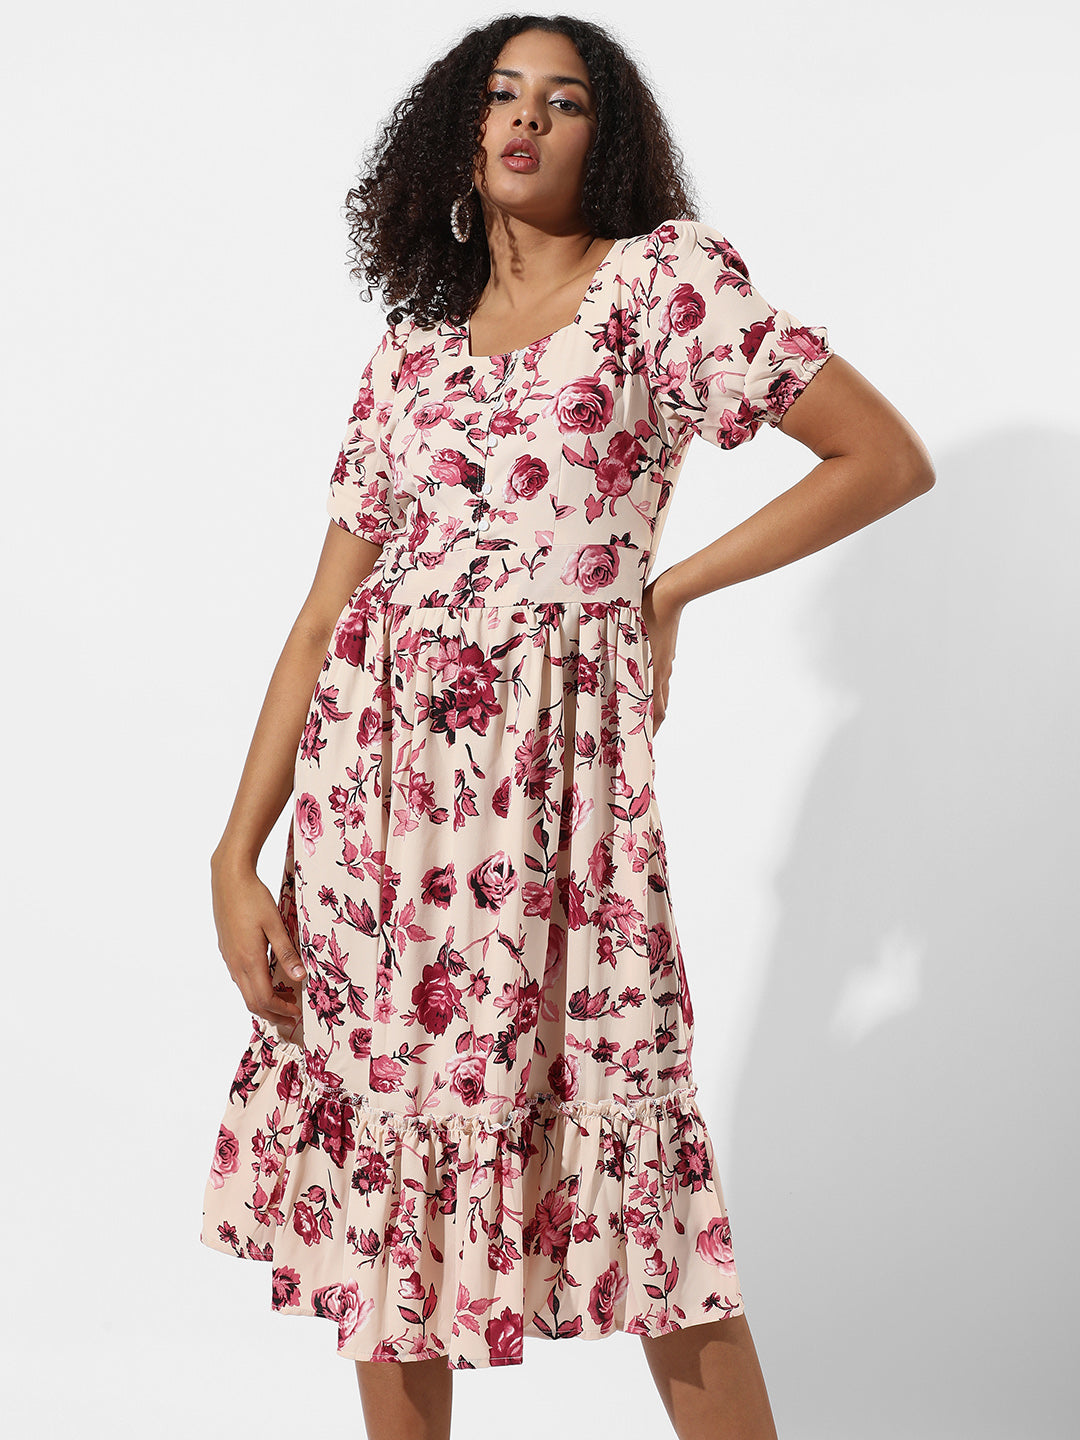 Floral Print Dress With Ruffle Detail